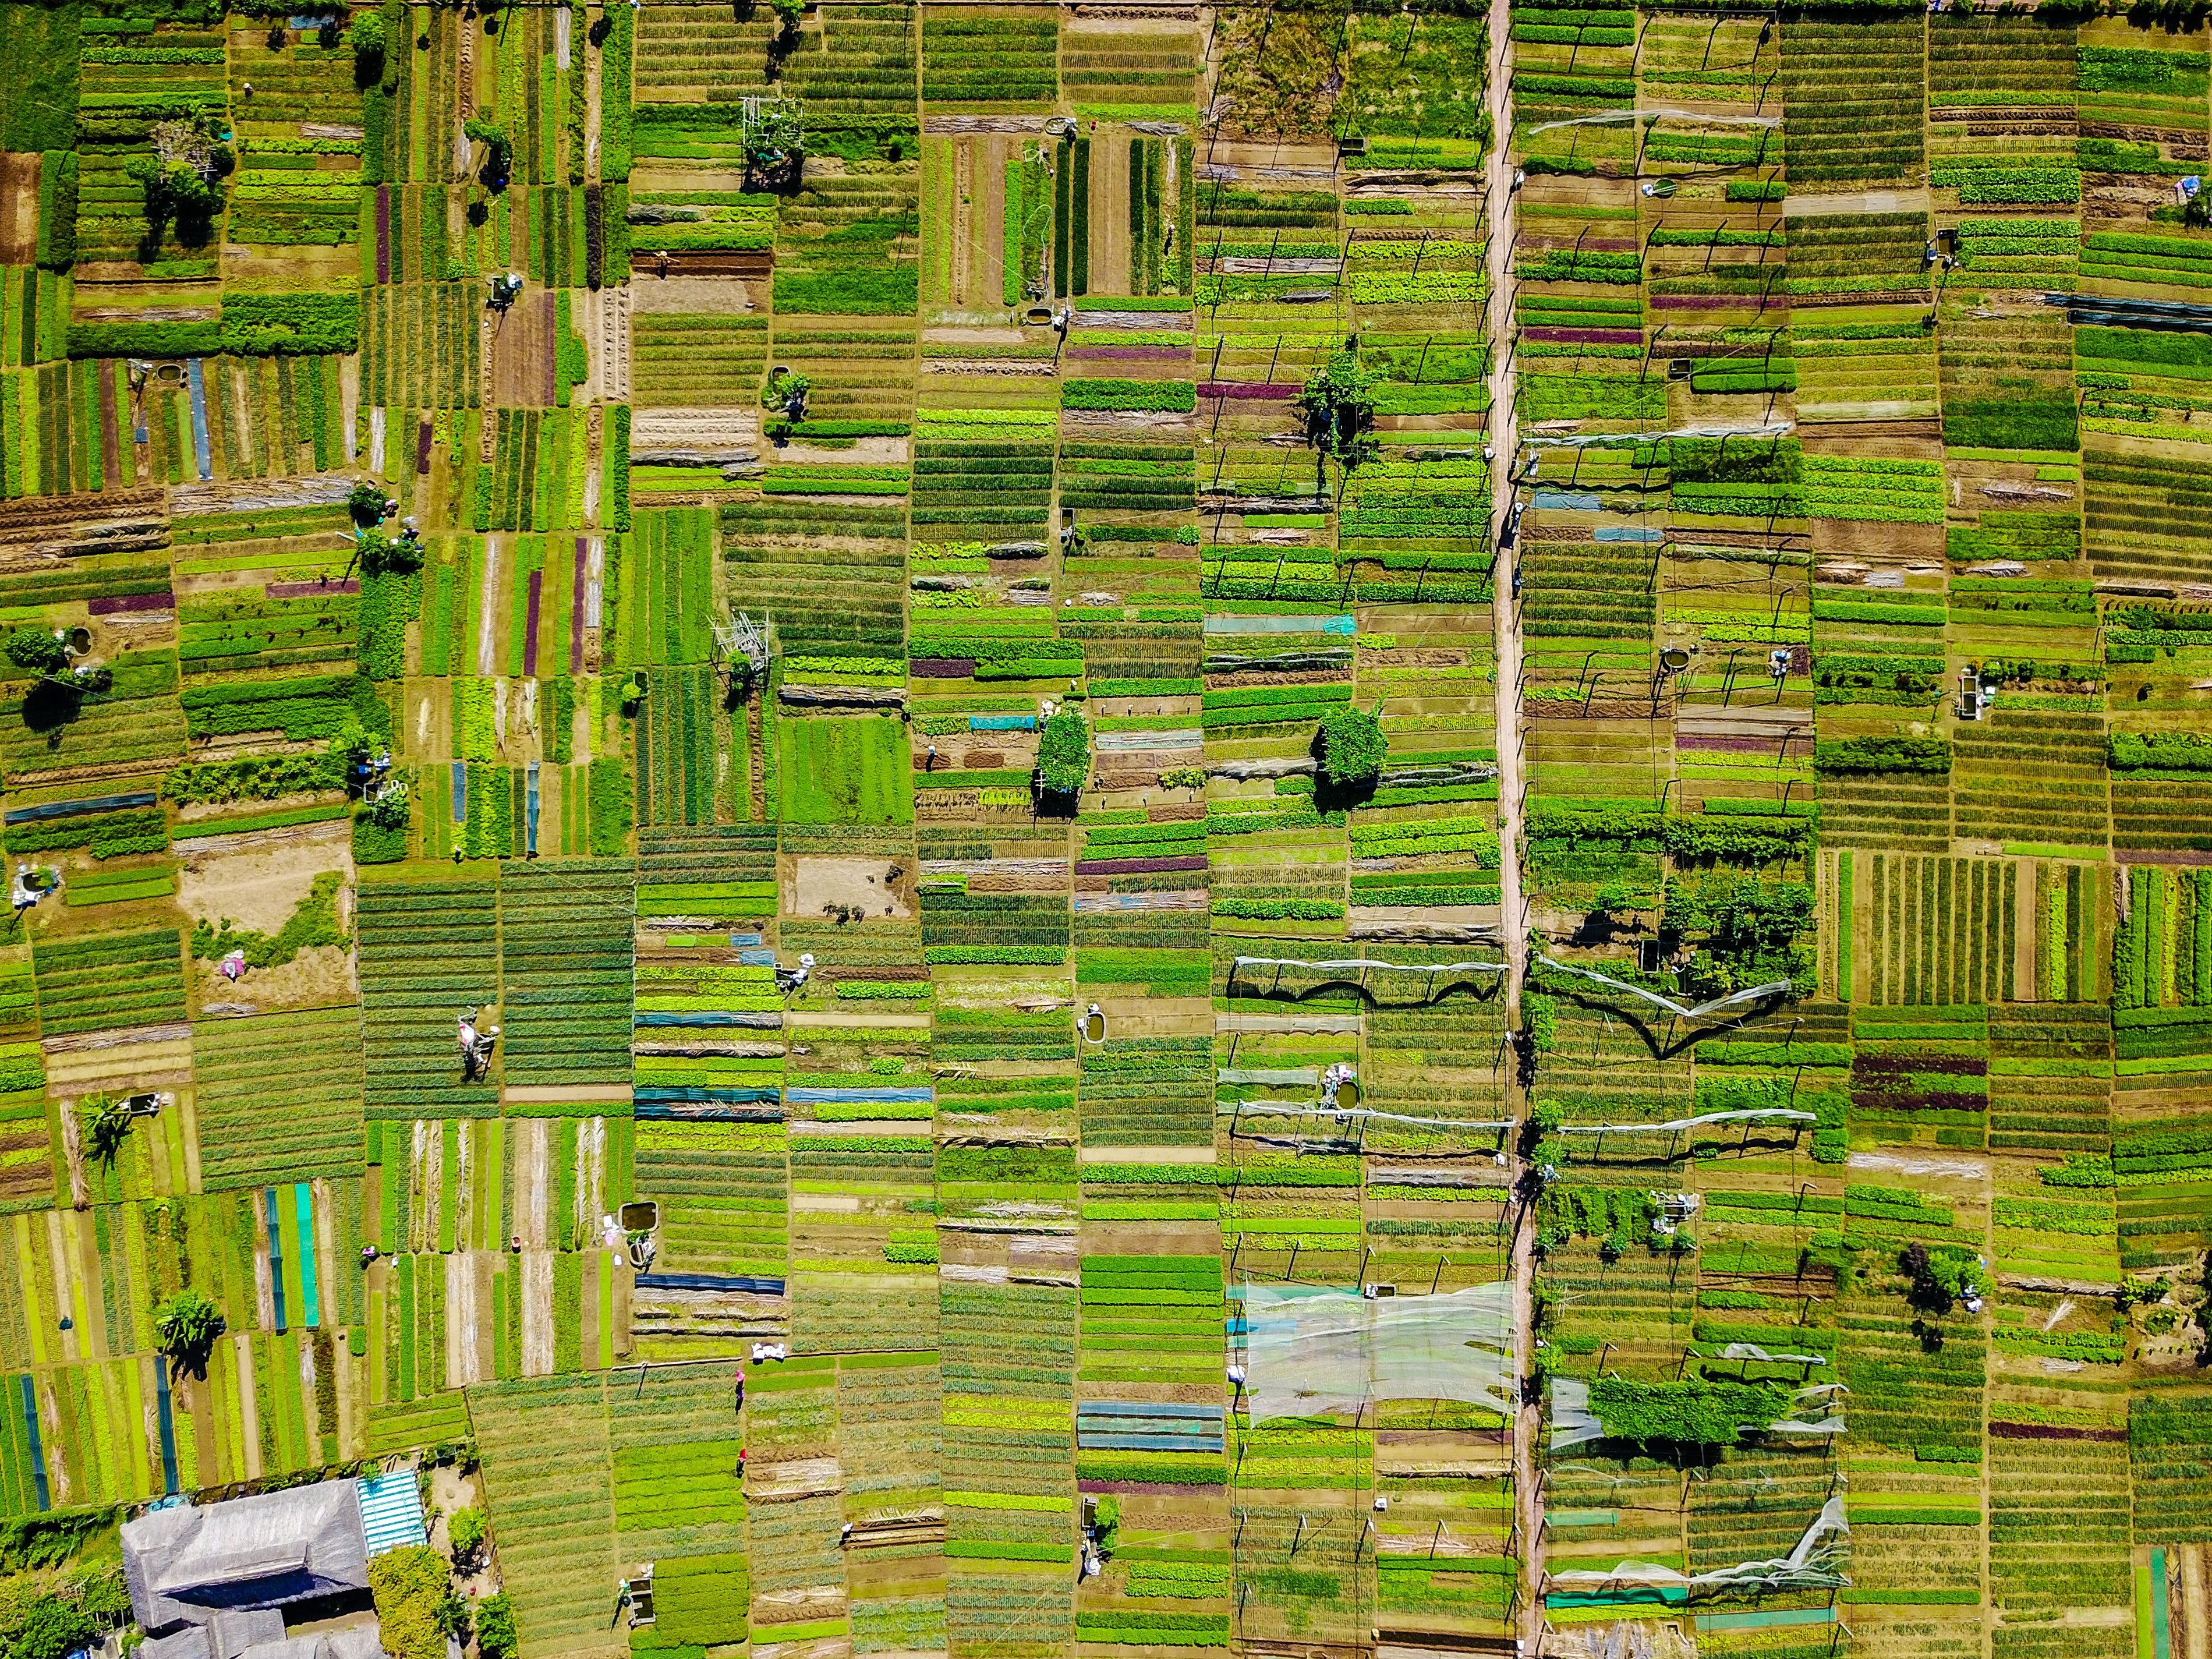 An aerial view of lots of fields